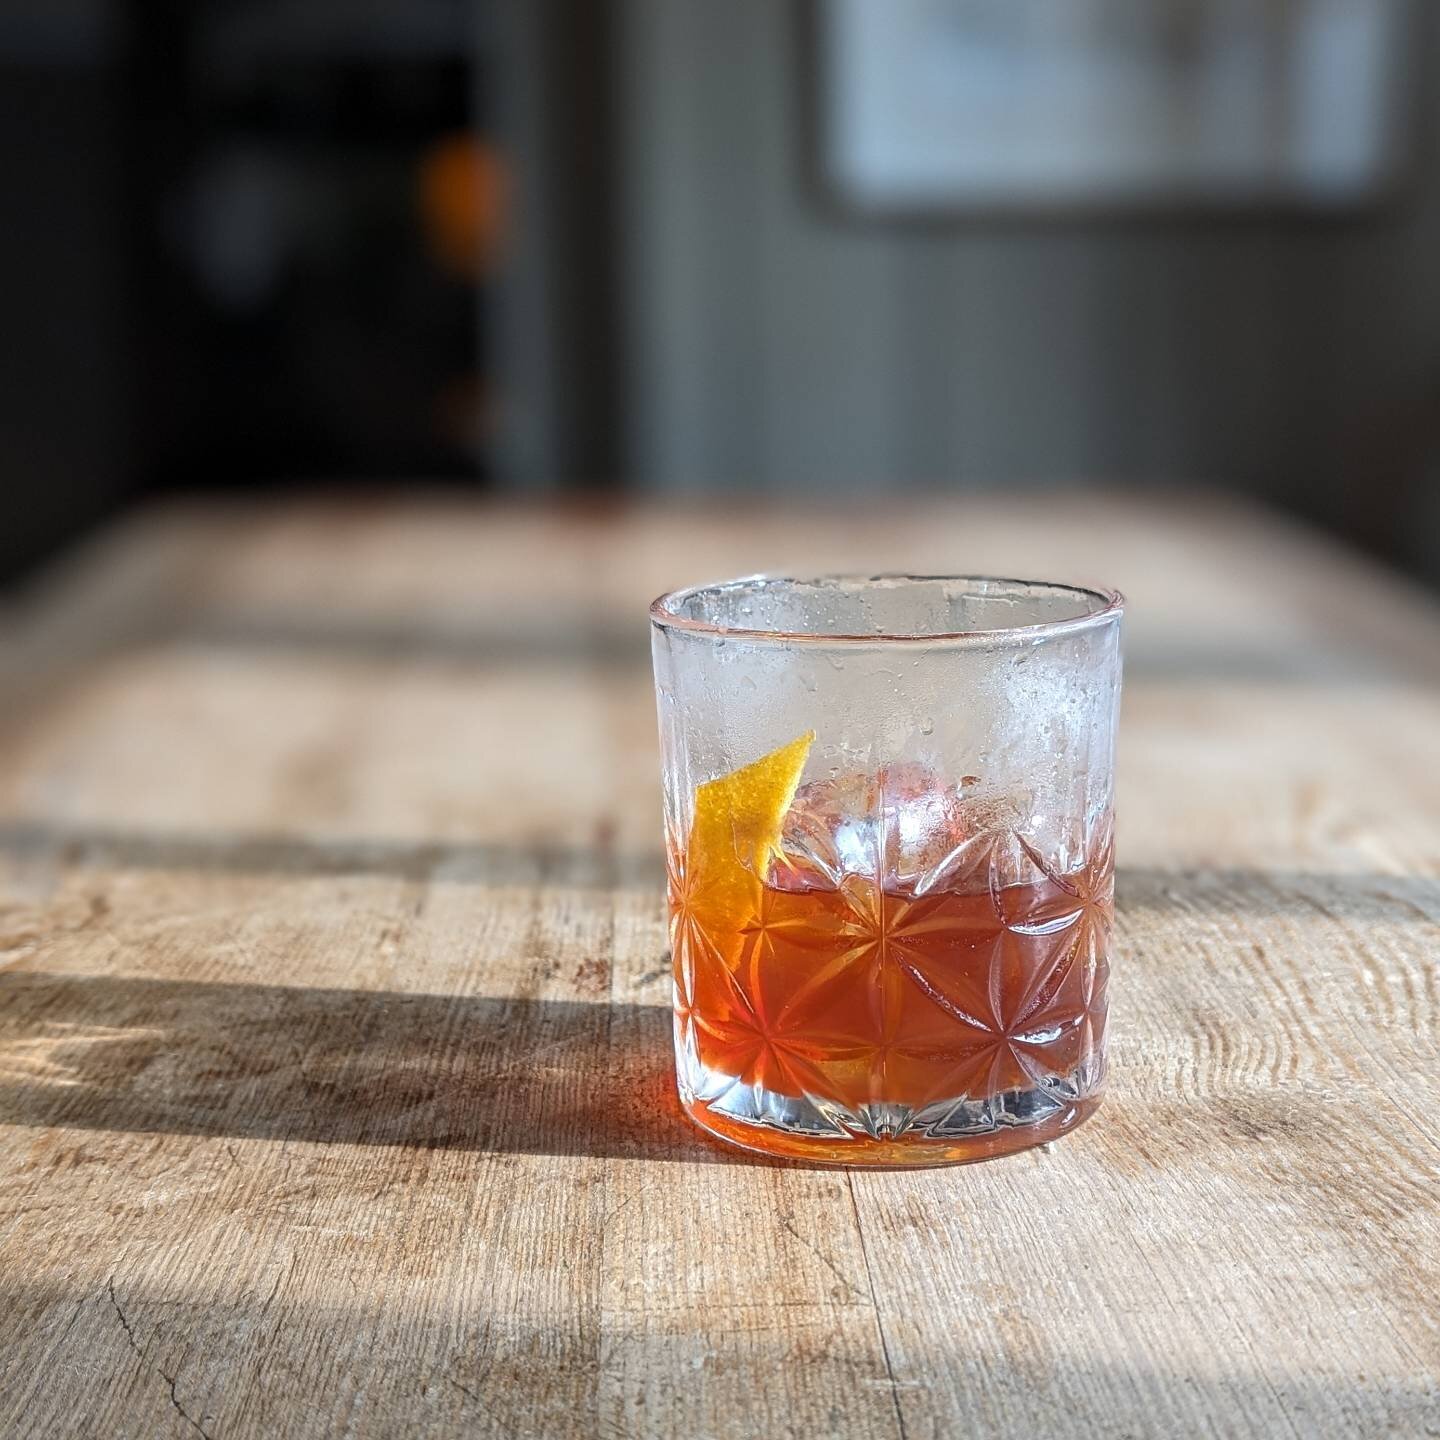 For those of you not abstaining we would like to introduce &quot;The Federation&quot; 

A short tequila based cocktail inspired by the old fashioned.

Seriously good, if that's your thing.

We're also restarting our cocktail happy hour on Fridays.

?